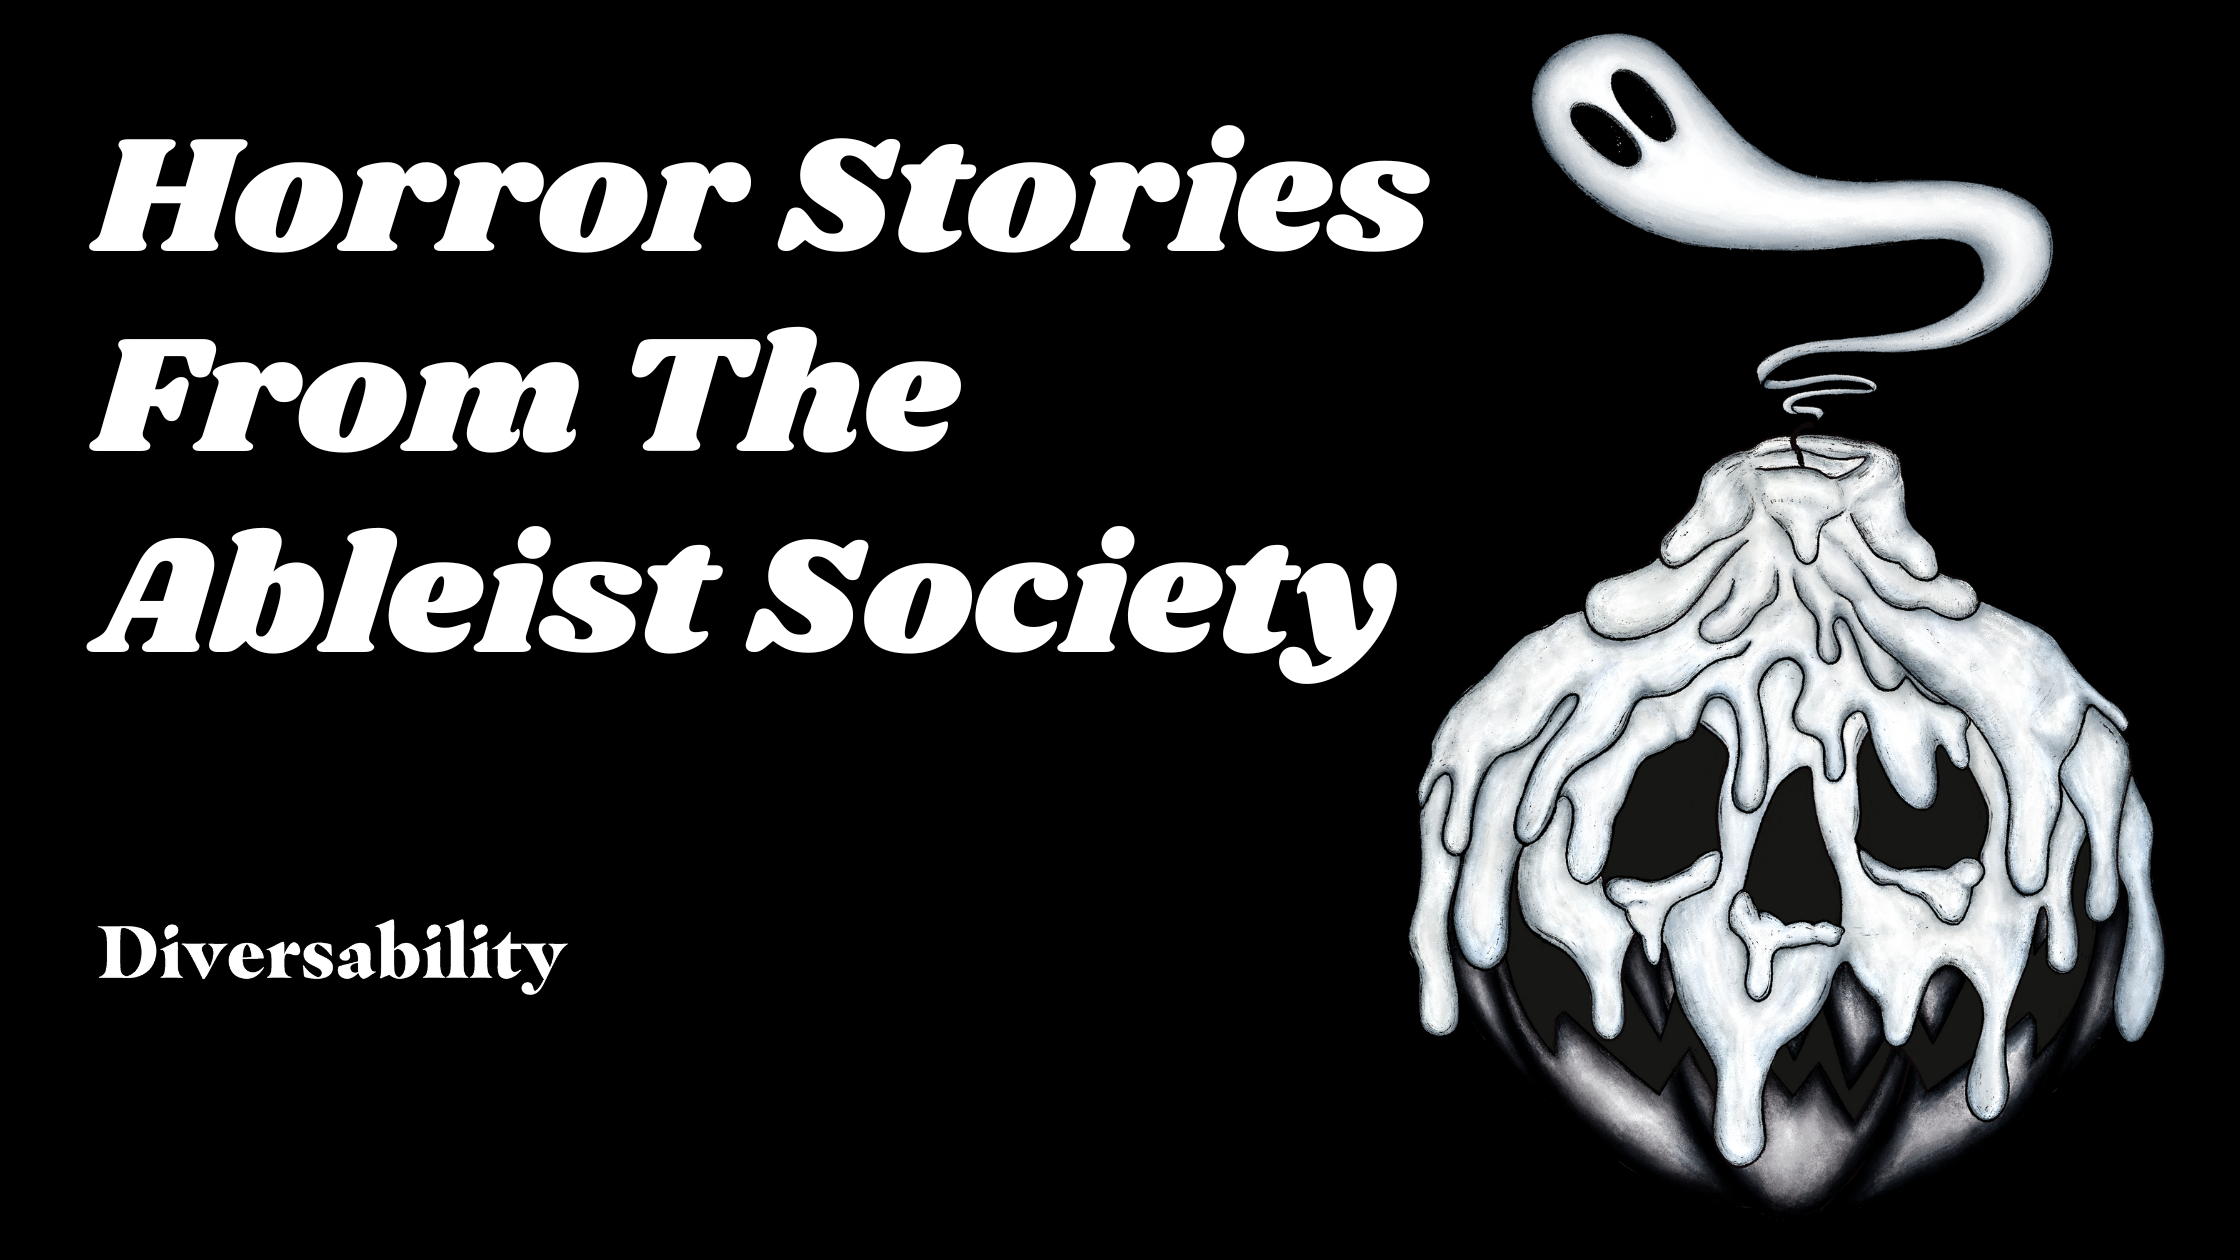 Fishnet Foot Job - Horror Stories From The Ableist Society â€” Diversability